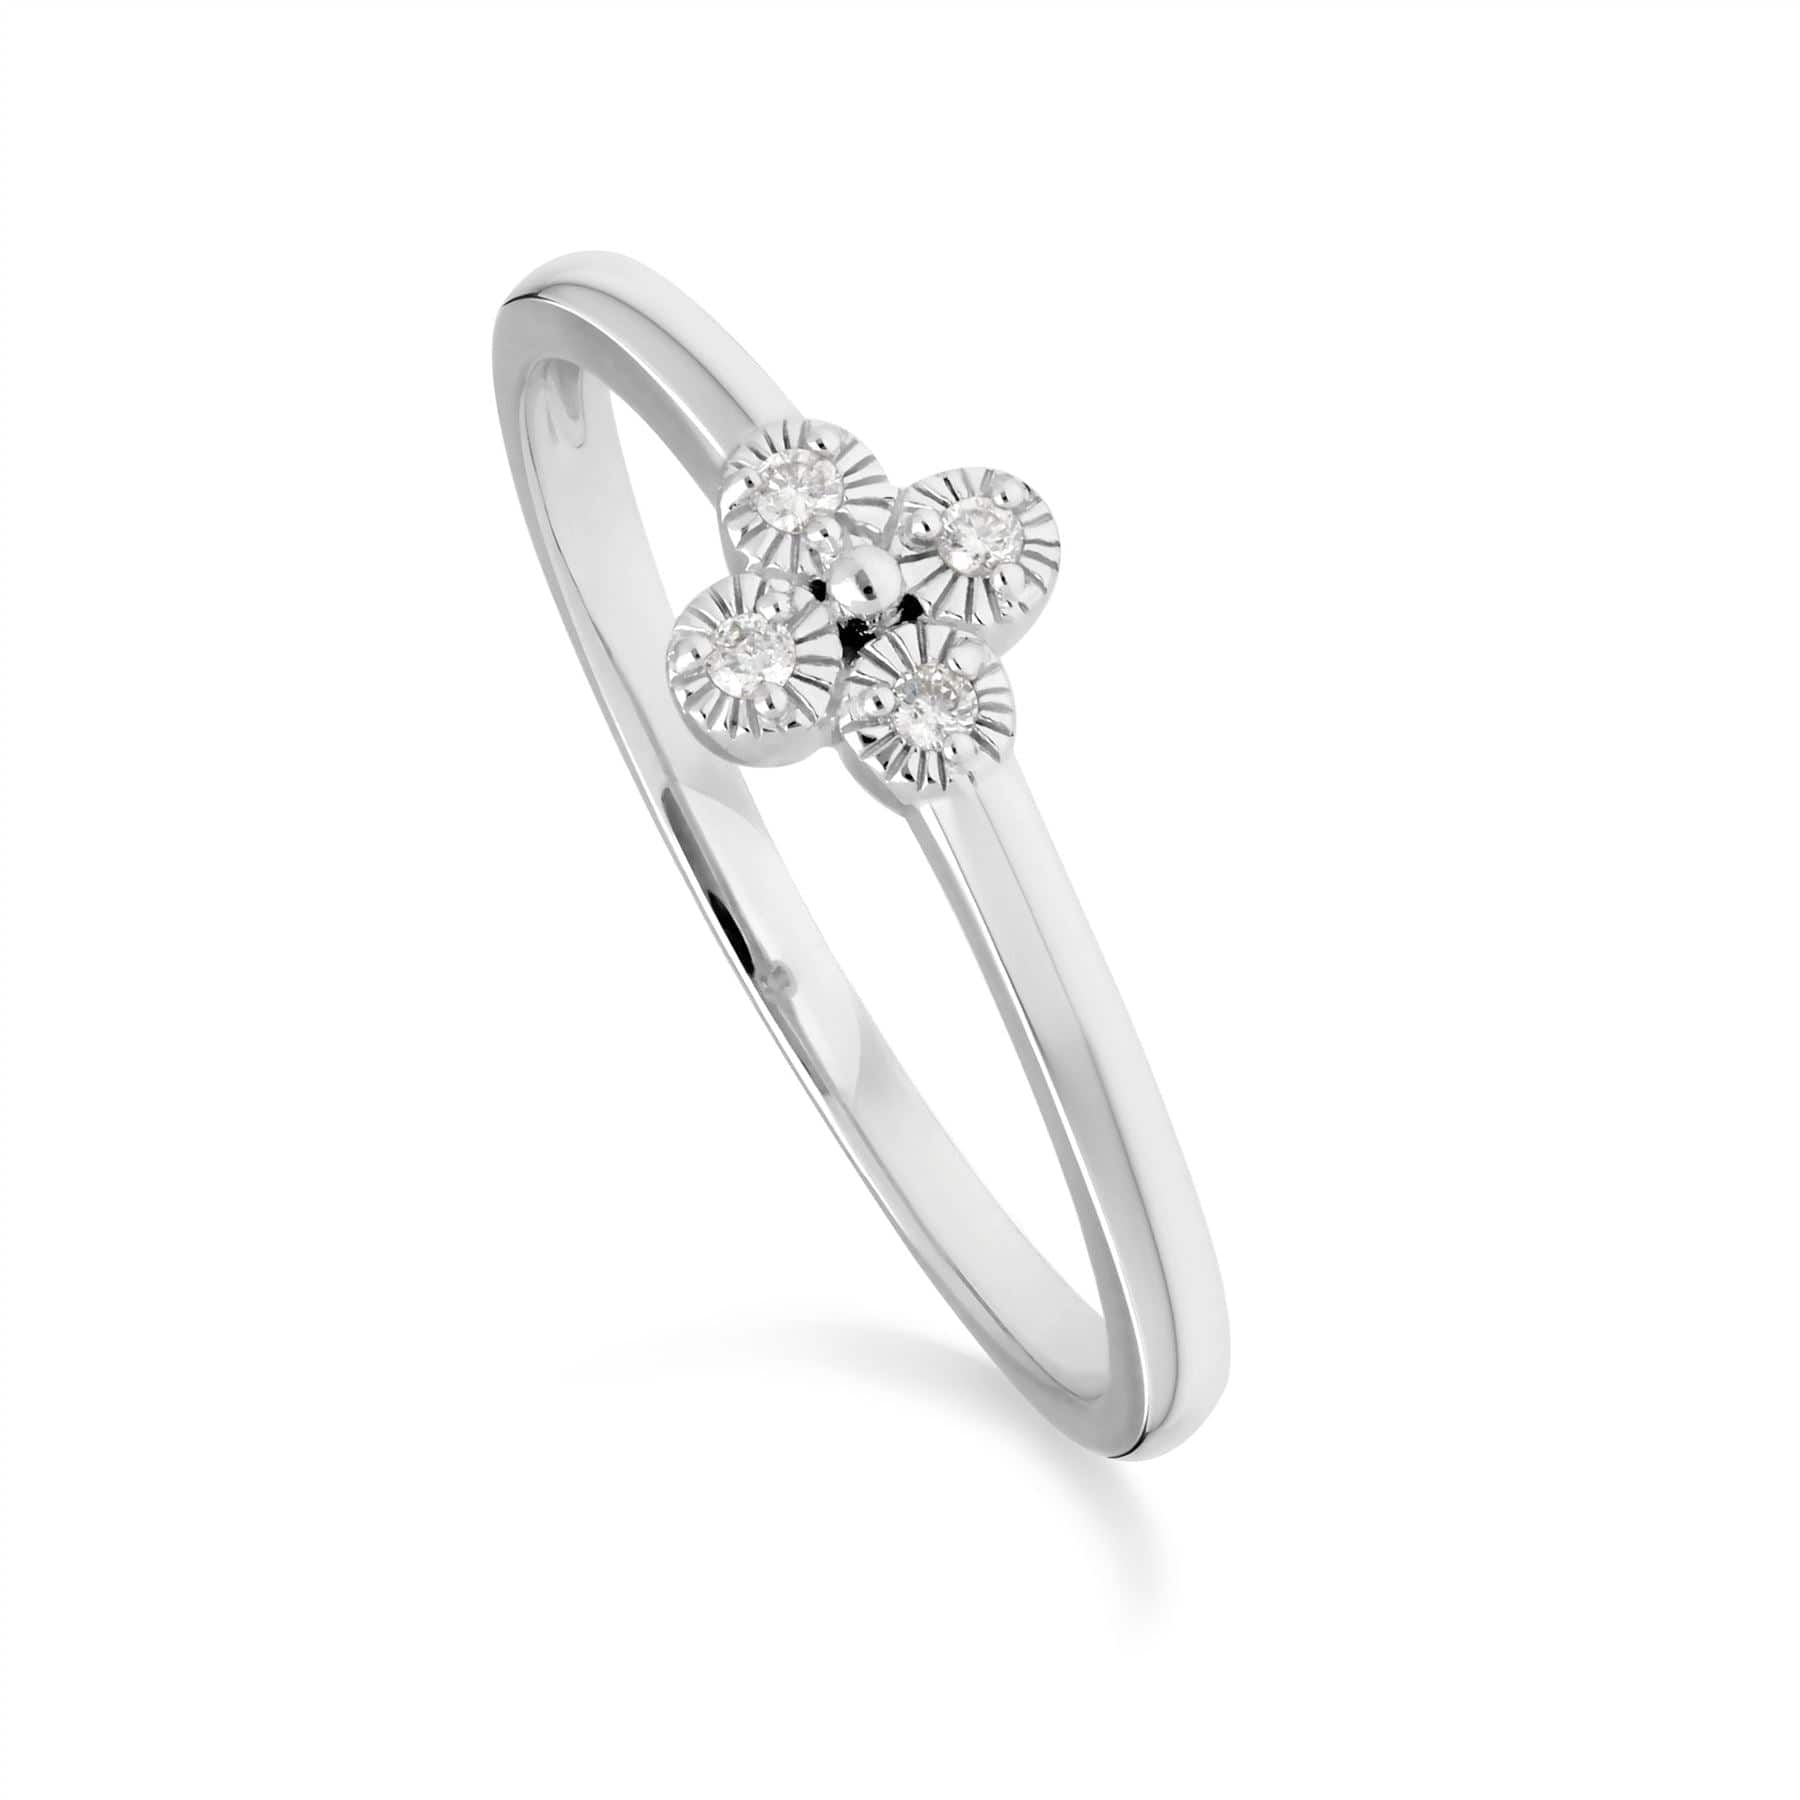 162R0398019 Diamond Flowers Ring in 9ct White Gold 1